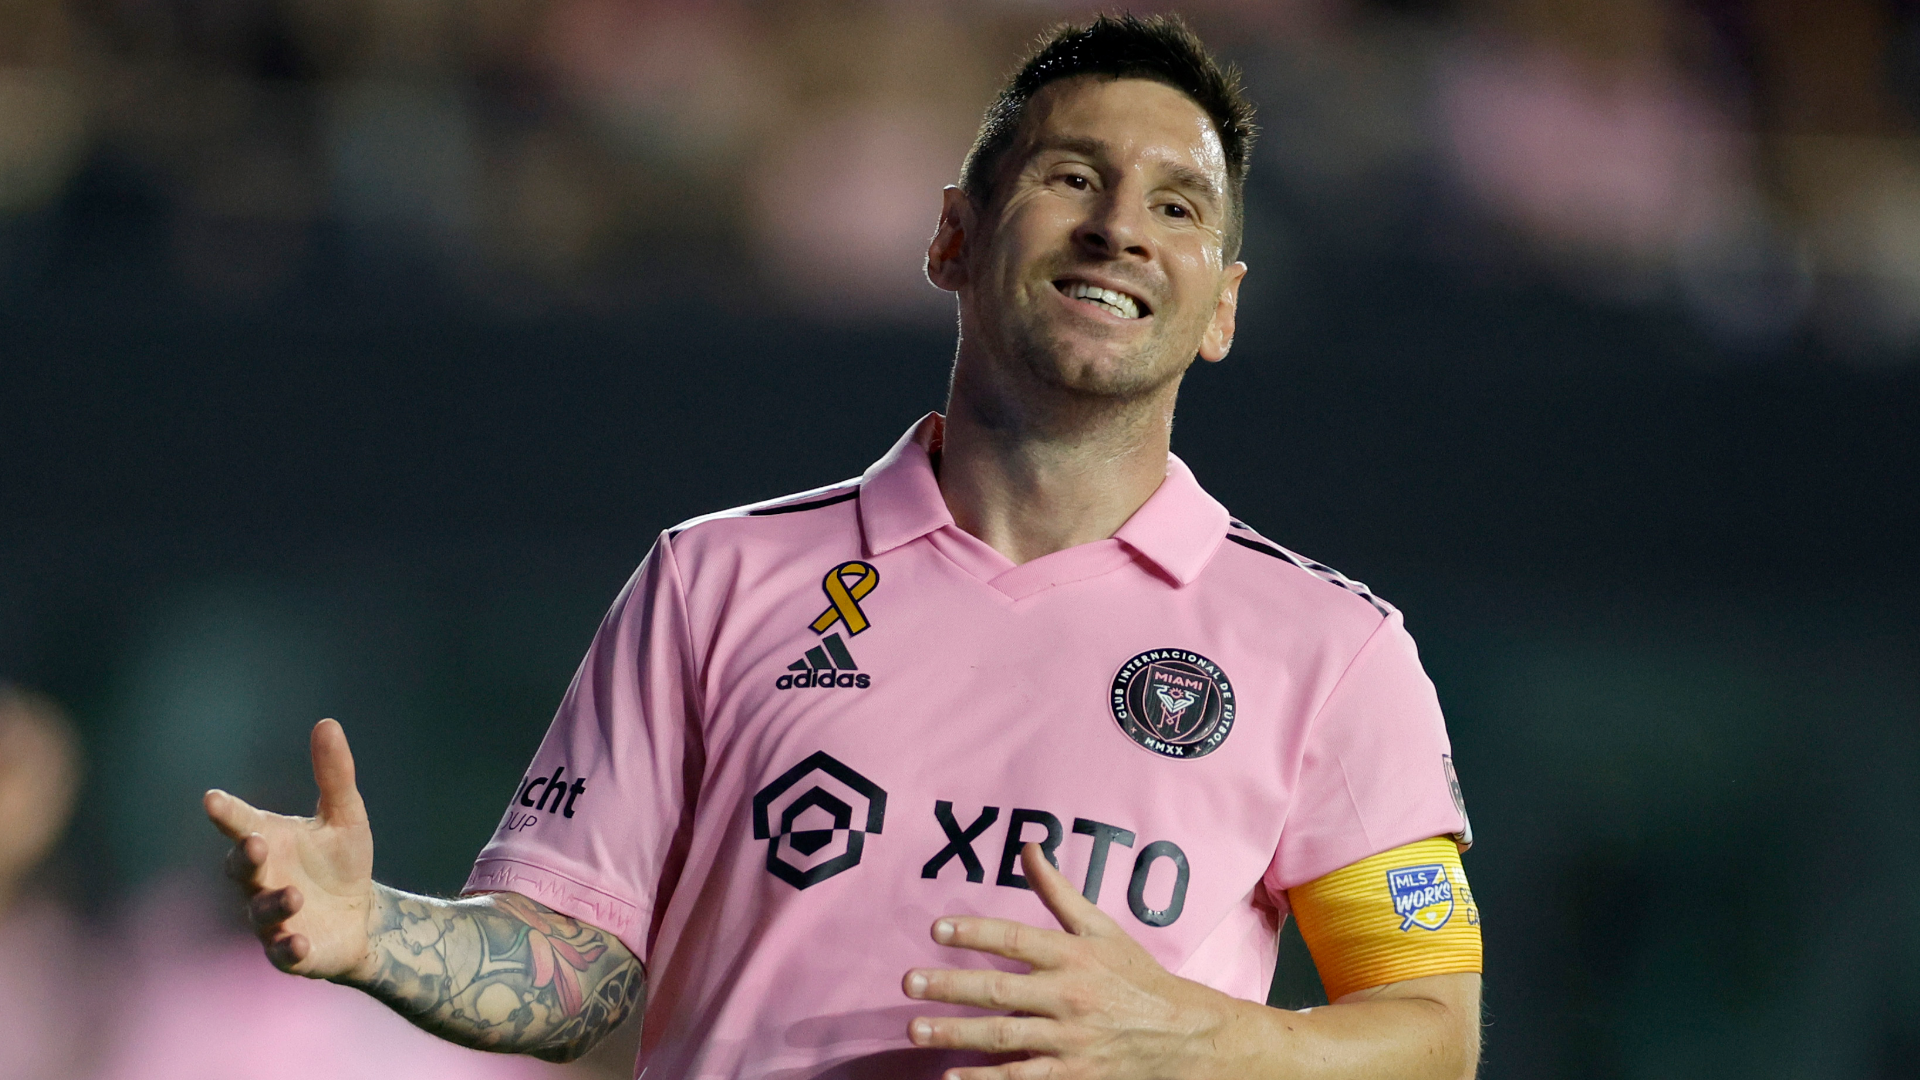 No Lionel Messi for Inter Miami! Argentine misses U.S. Open Cup final against Houston Dynamo due to injury